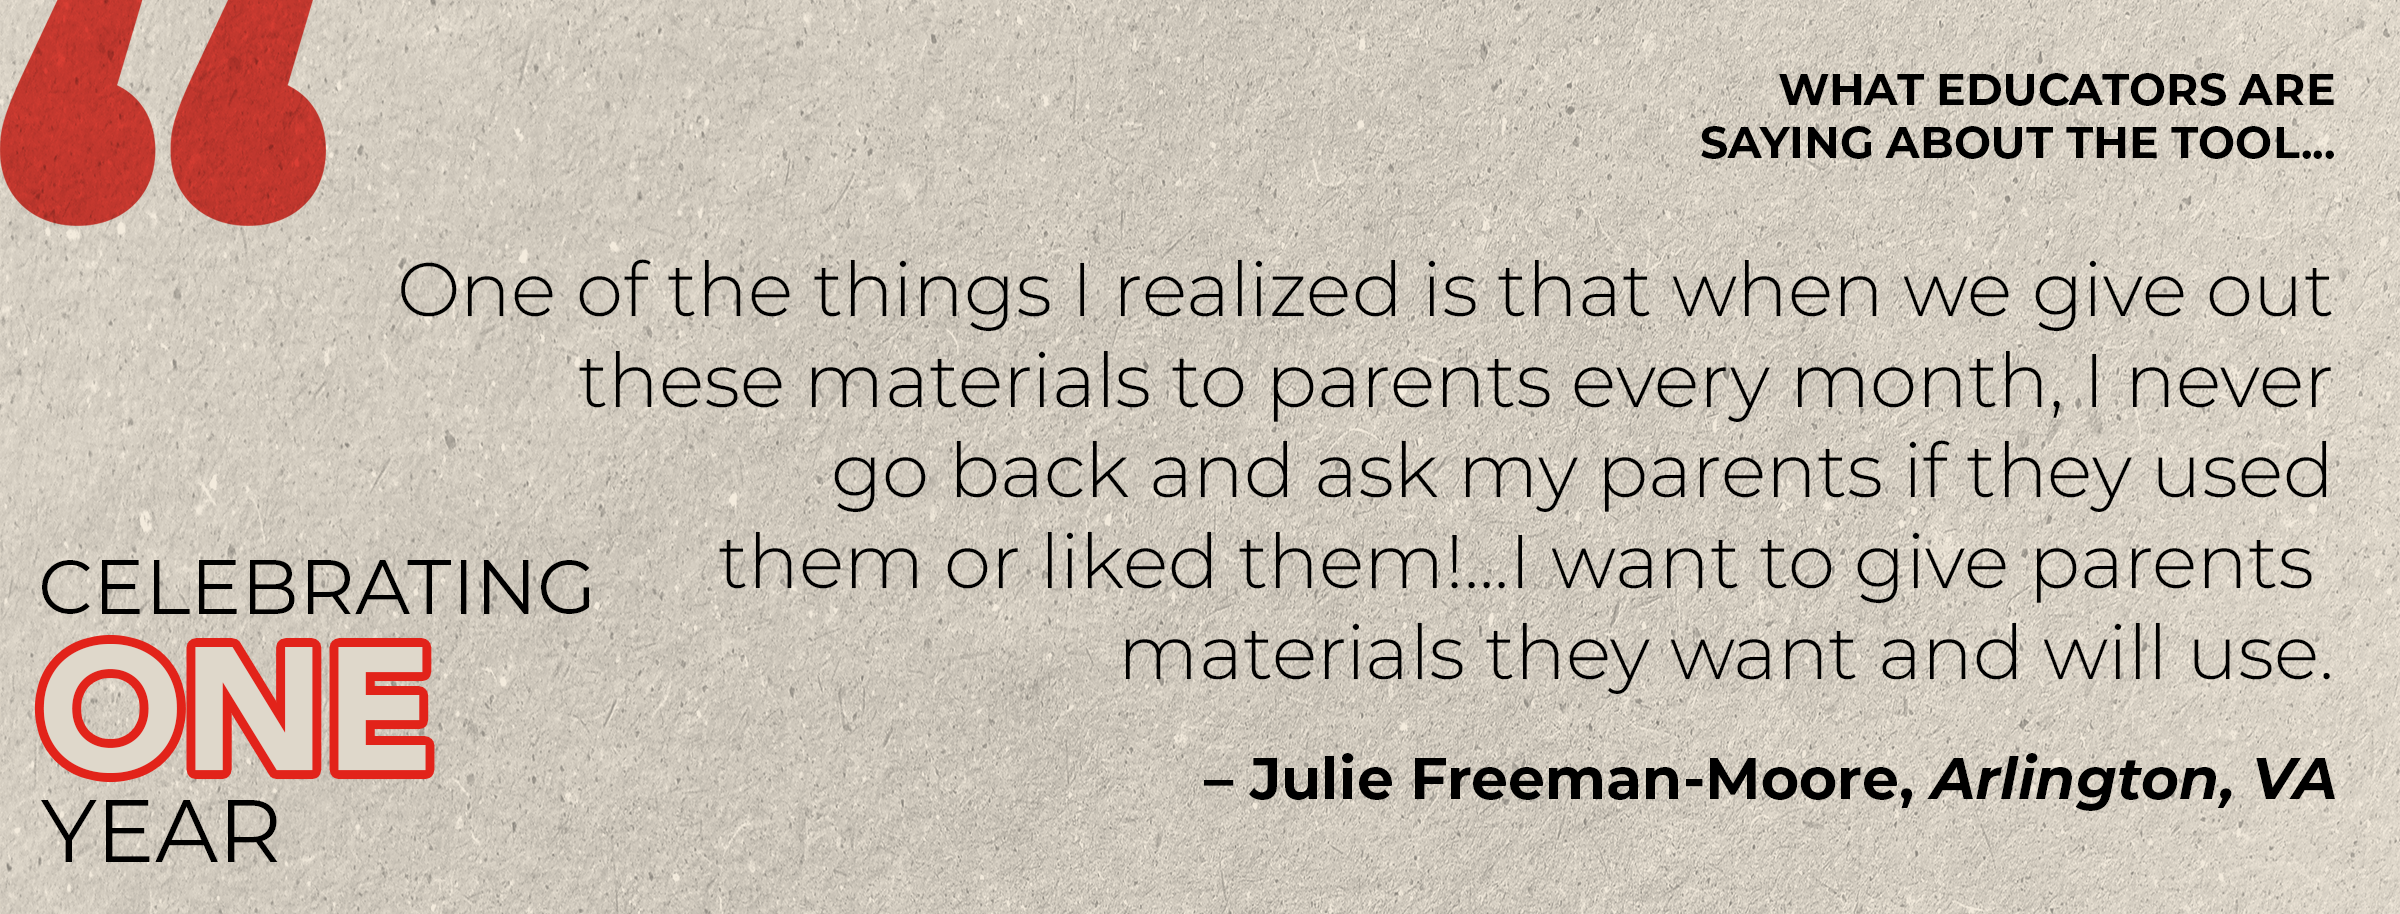 "One of the things I realized is that when we give out these materials to parents every month, I never go back and ask my parents if they used them or liked them!...I want to give parents materials they want and will use." -- Julie Freeman-Moore, Arlington, VA